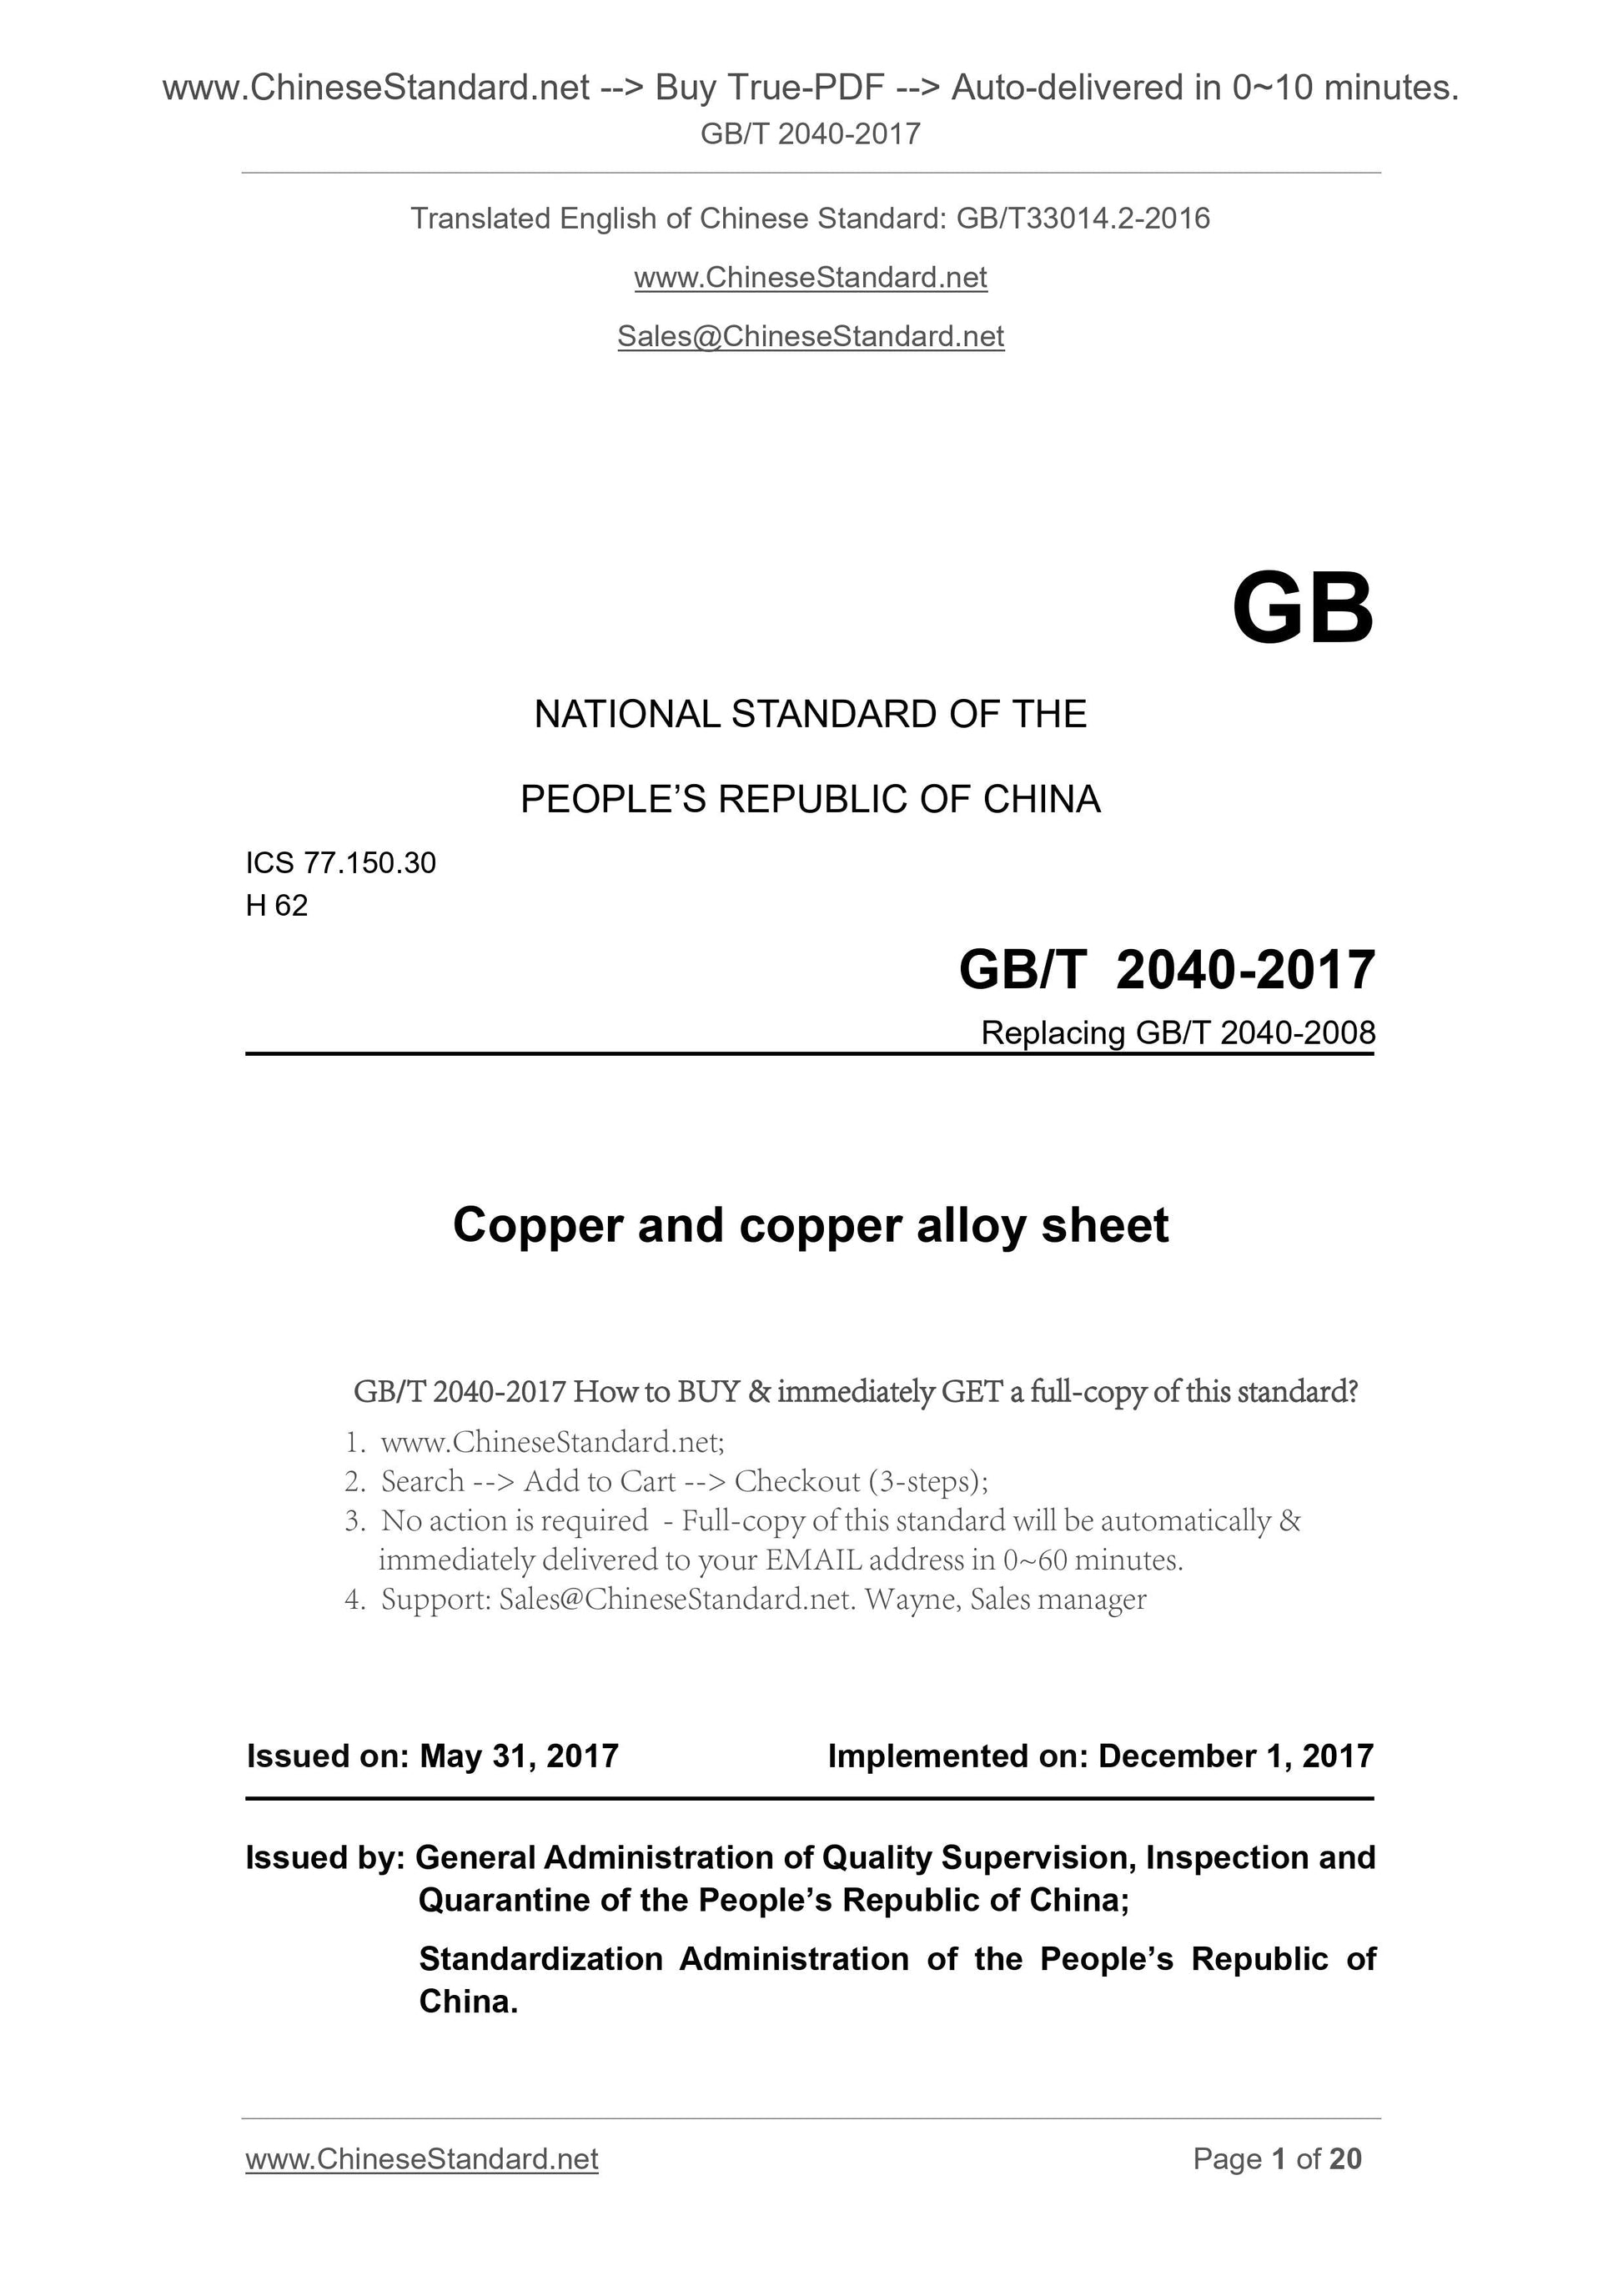 GB/T 2040-2017 Page 1